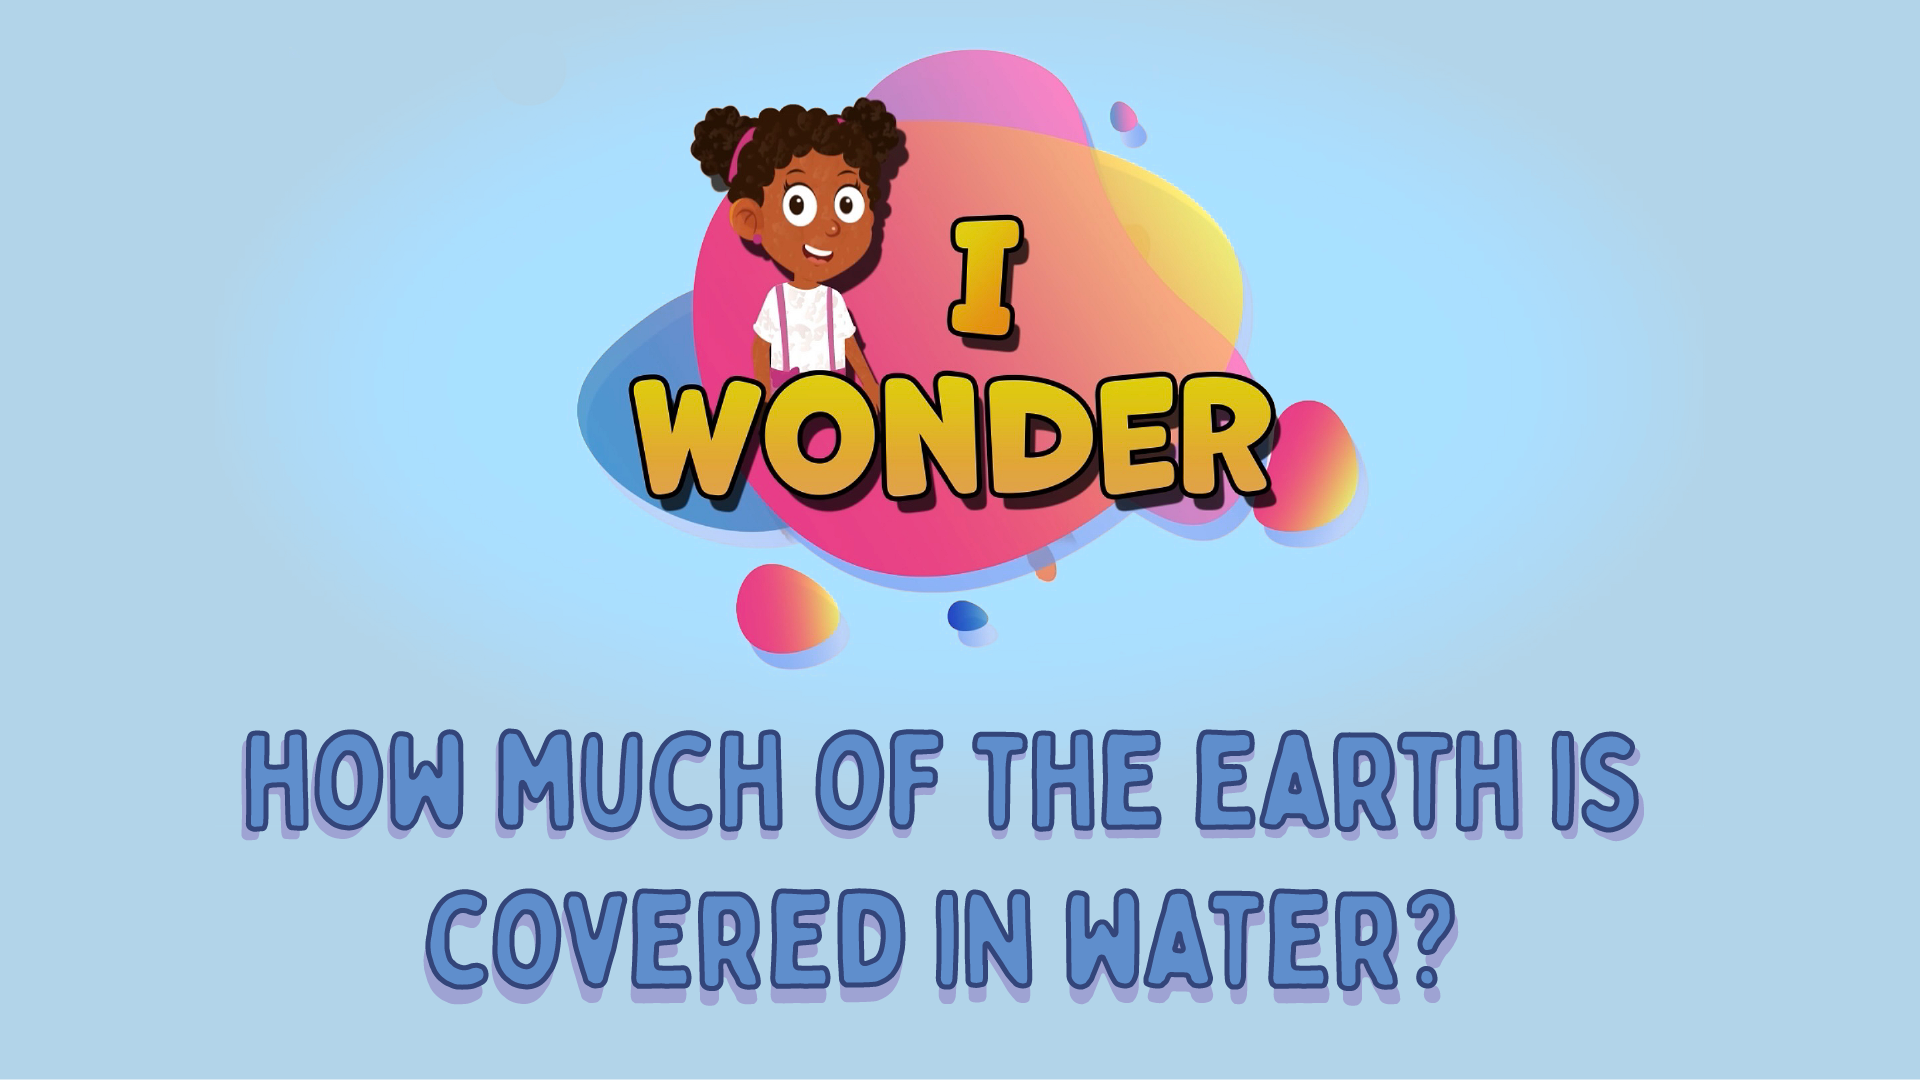 How Much Of The Earth Is Covered In Water?